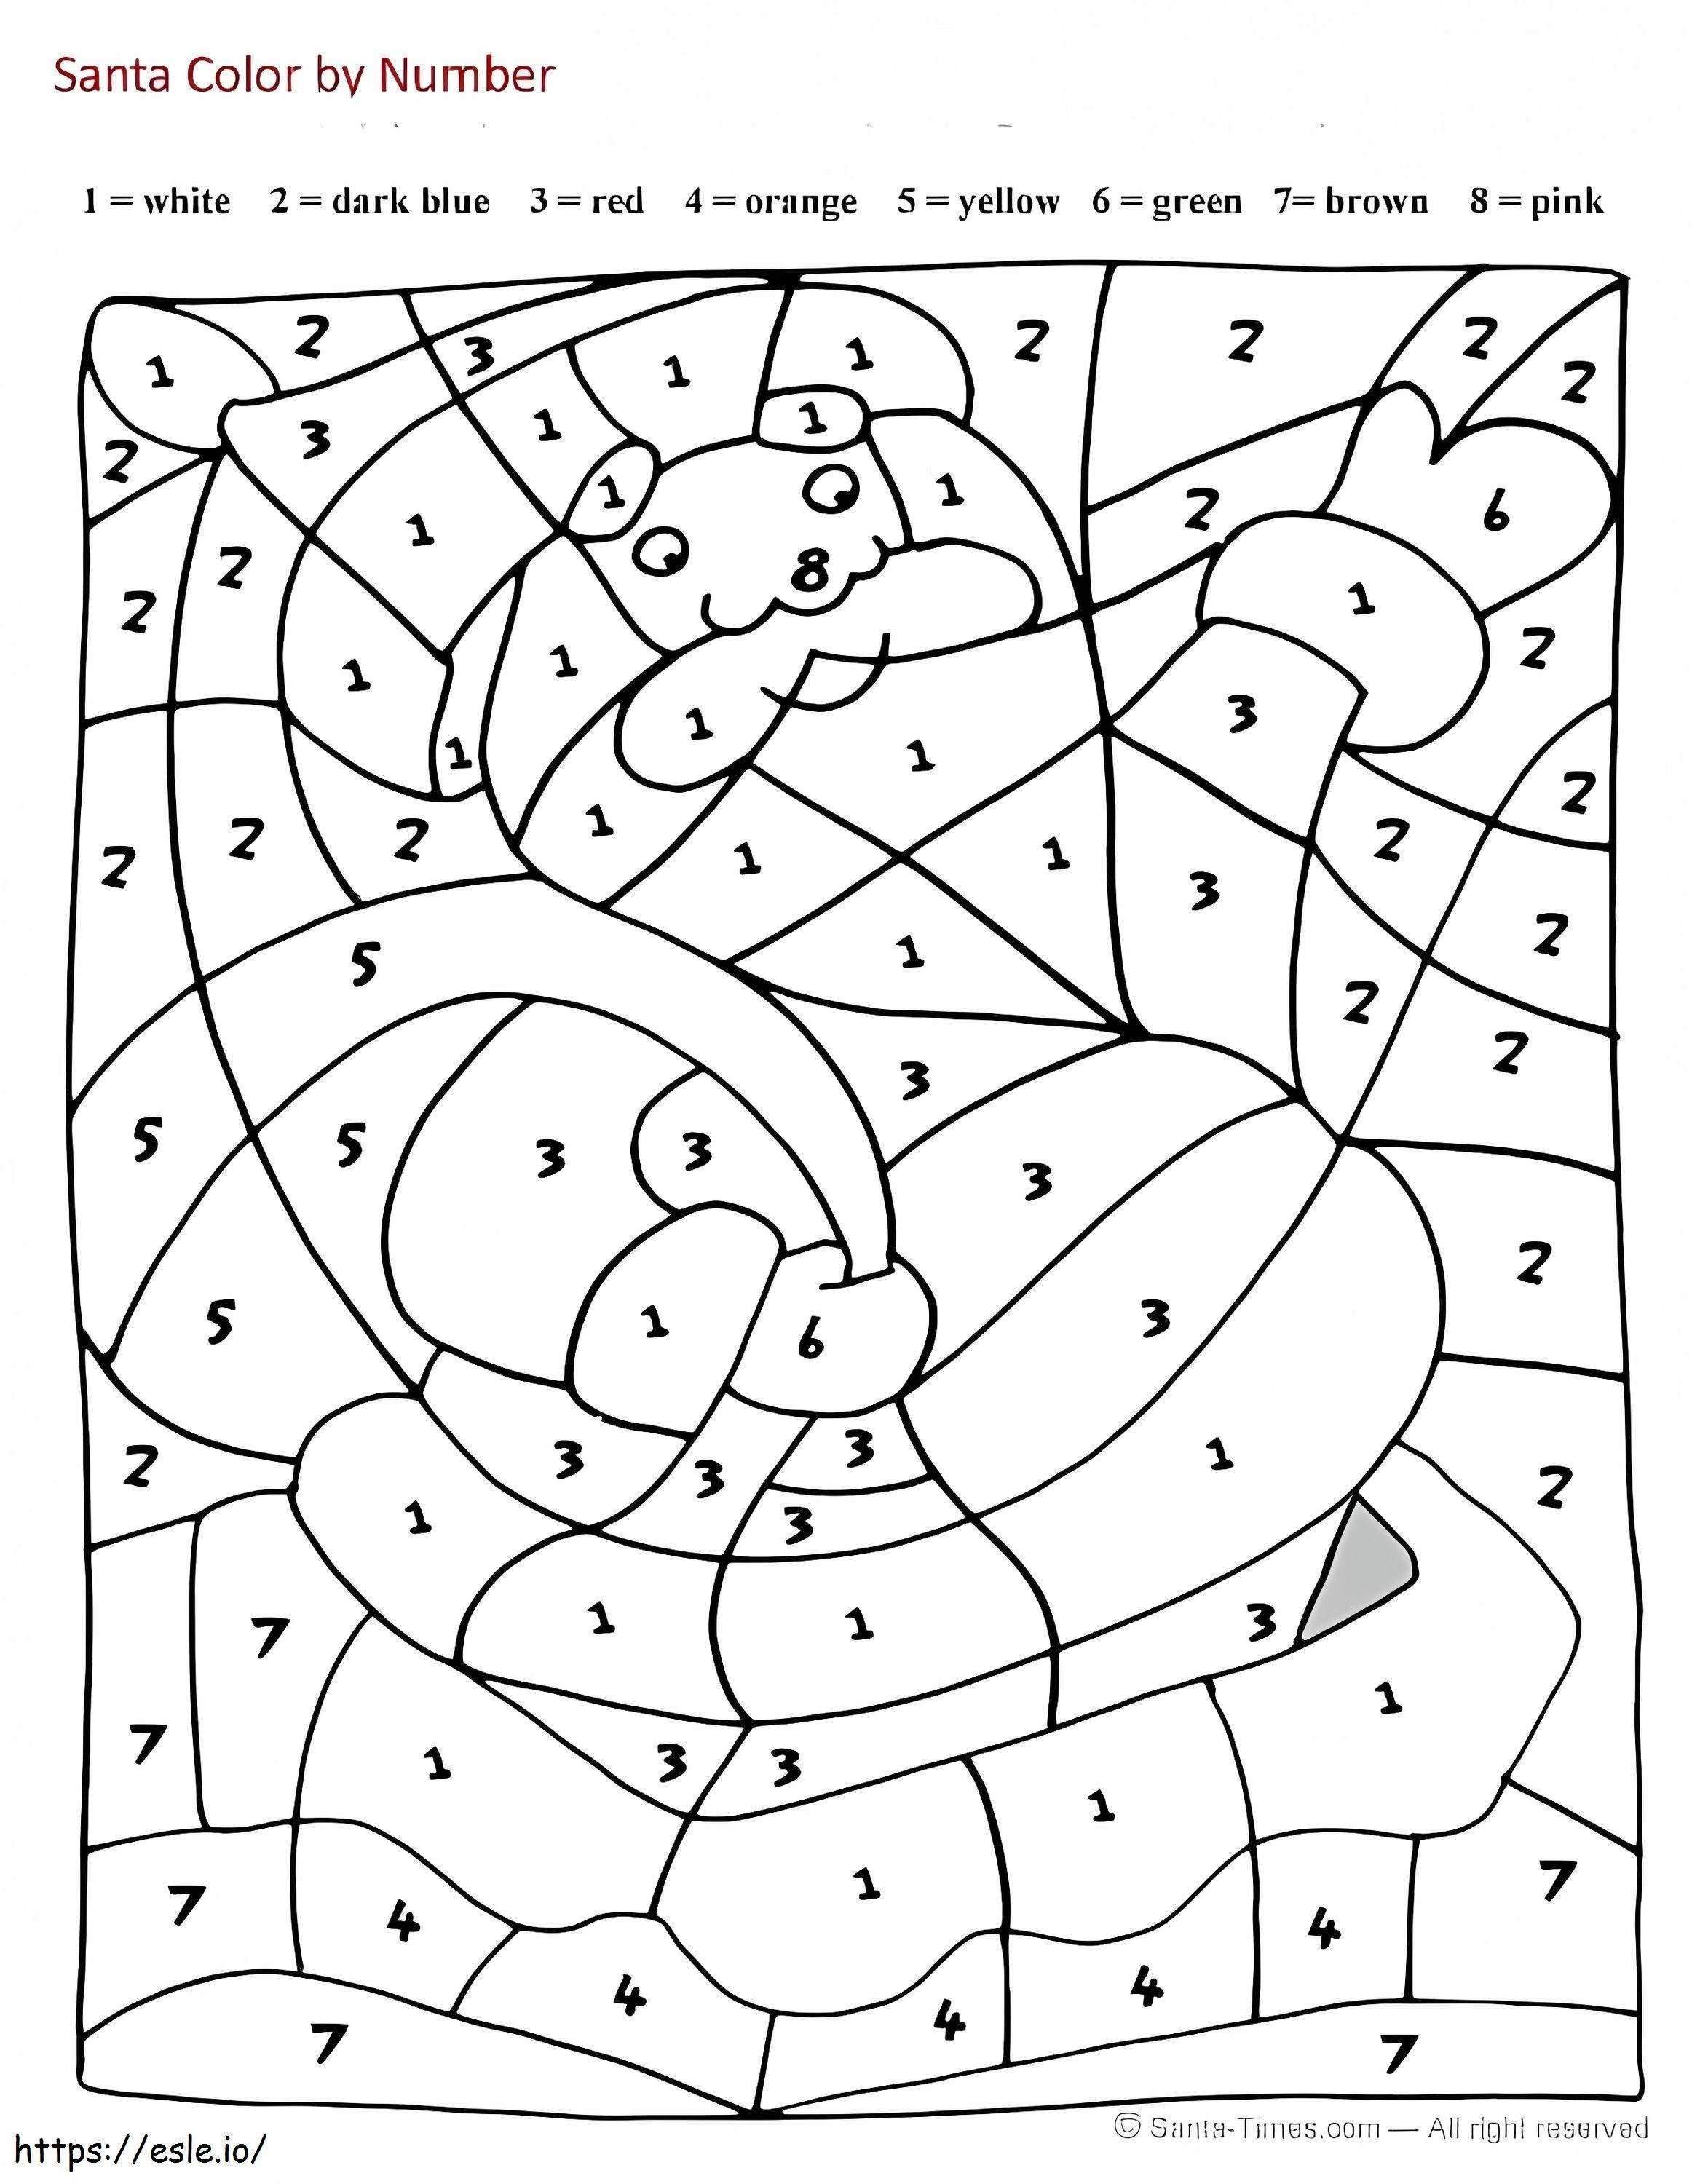 Santa Color By Number coloring page